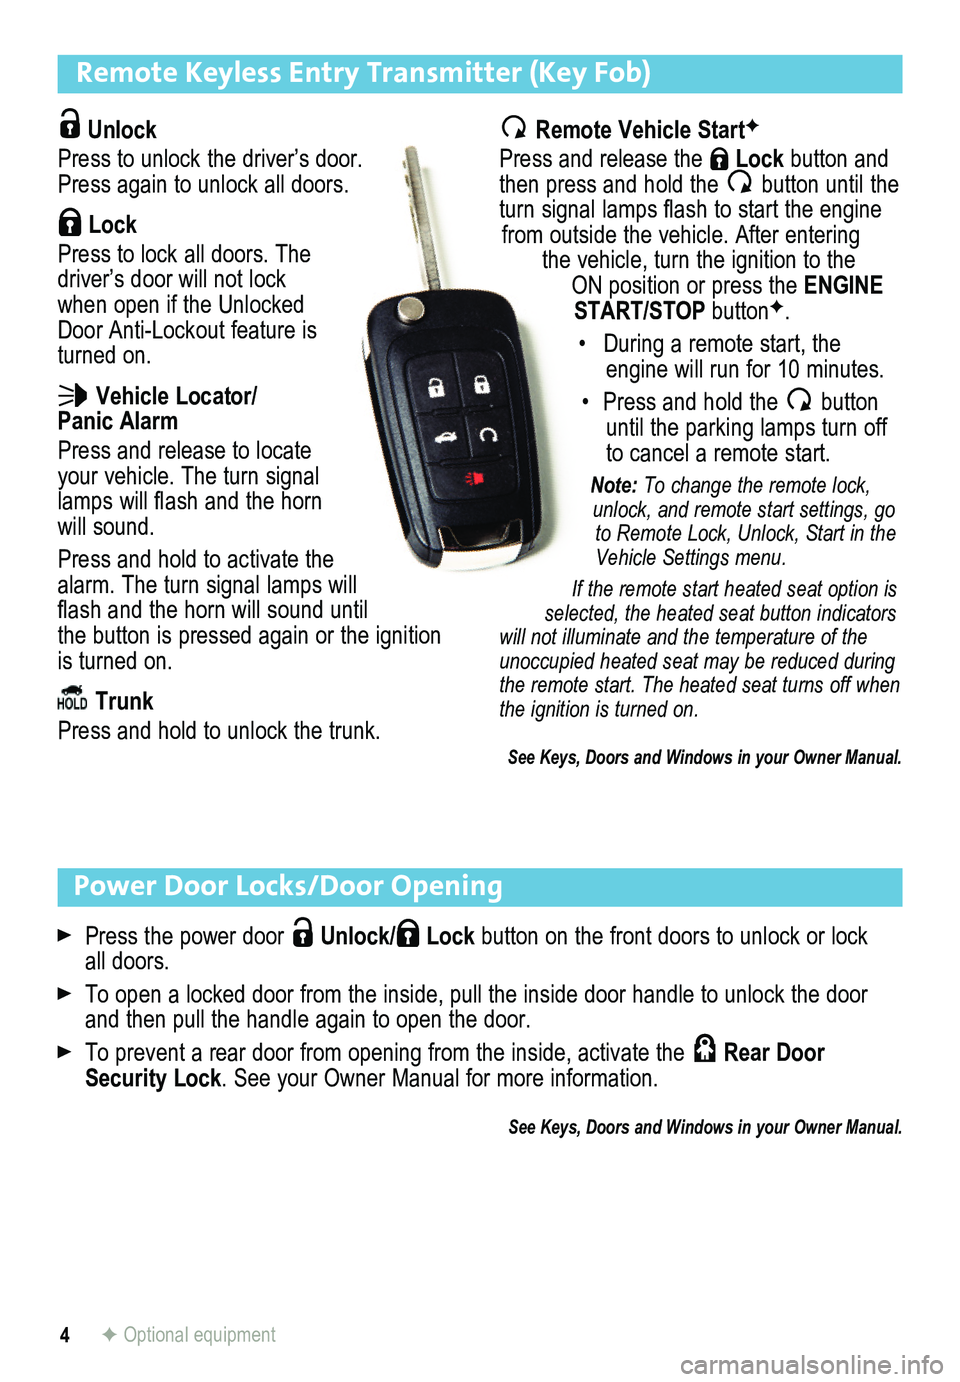 BUICK REGAL 2015  Get To Know Guide 4
Remote Keyless Entry Transmitter (Key Fob) 
 Unlock 
Press to unlock the driver’s door. Press again to unlock all doors.
 Lock 
Press to lock all doors. The driver’s door will not lock when open